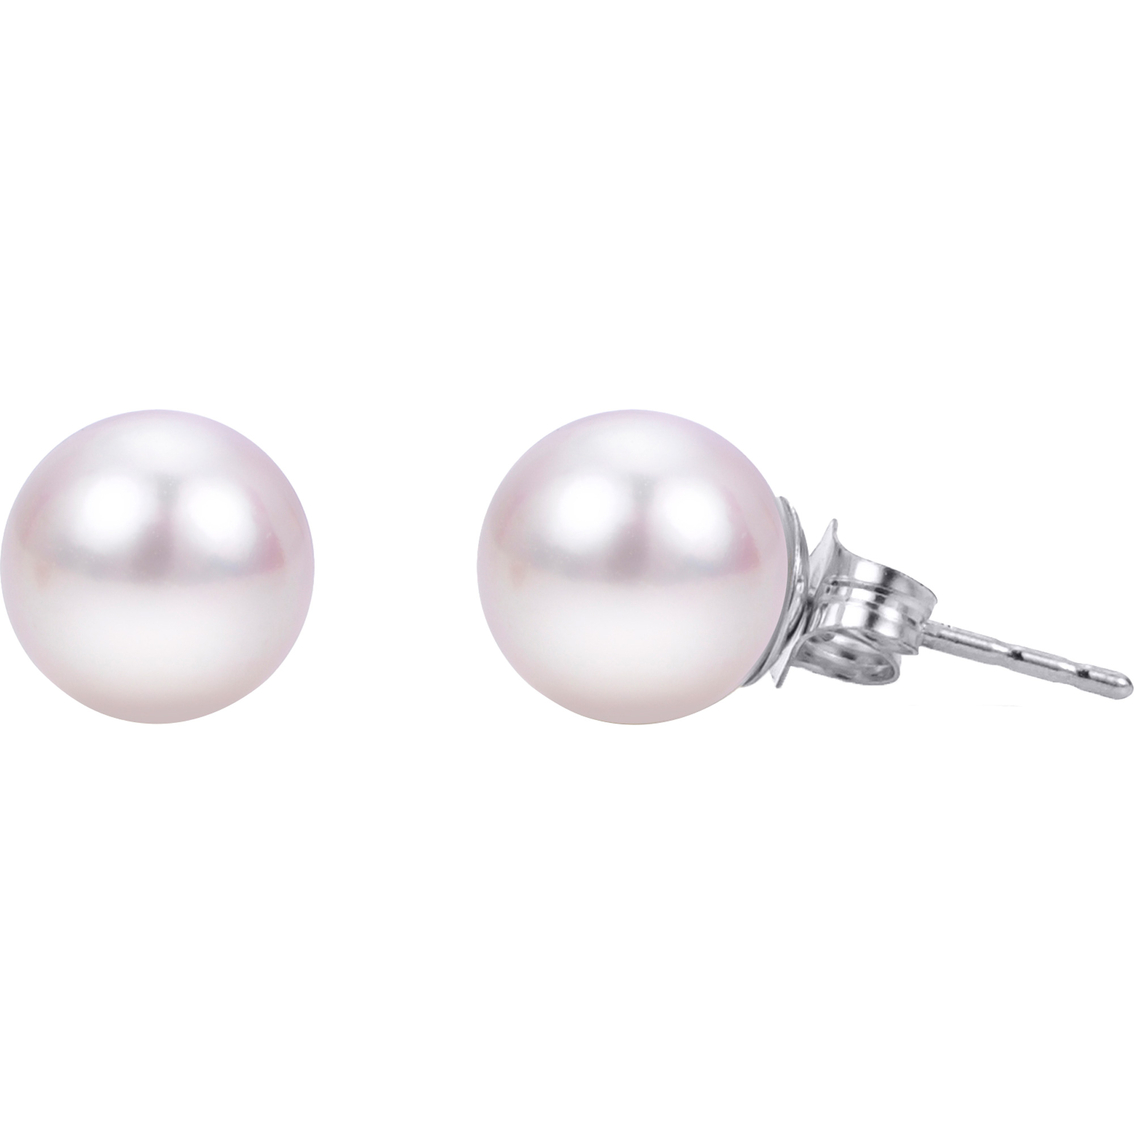 Imperial Deltah 14k White Gold 8mm Aa Akoya Cultured Pearl Stud ...